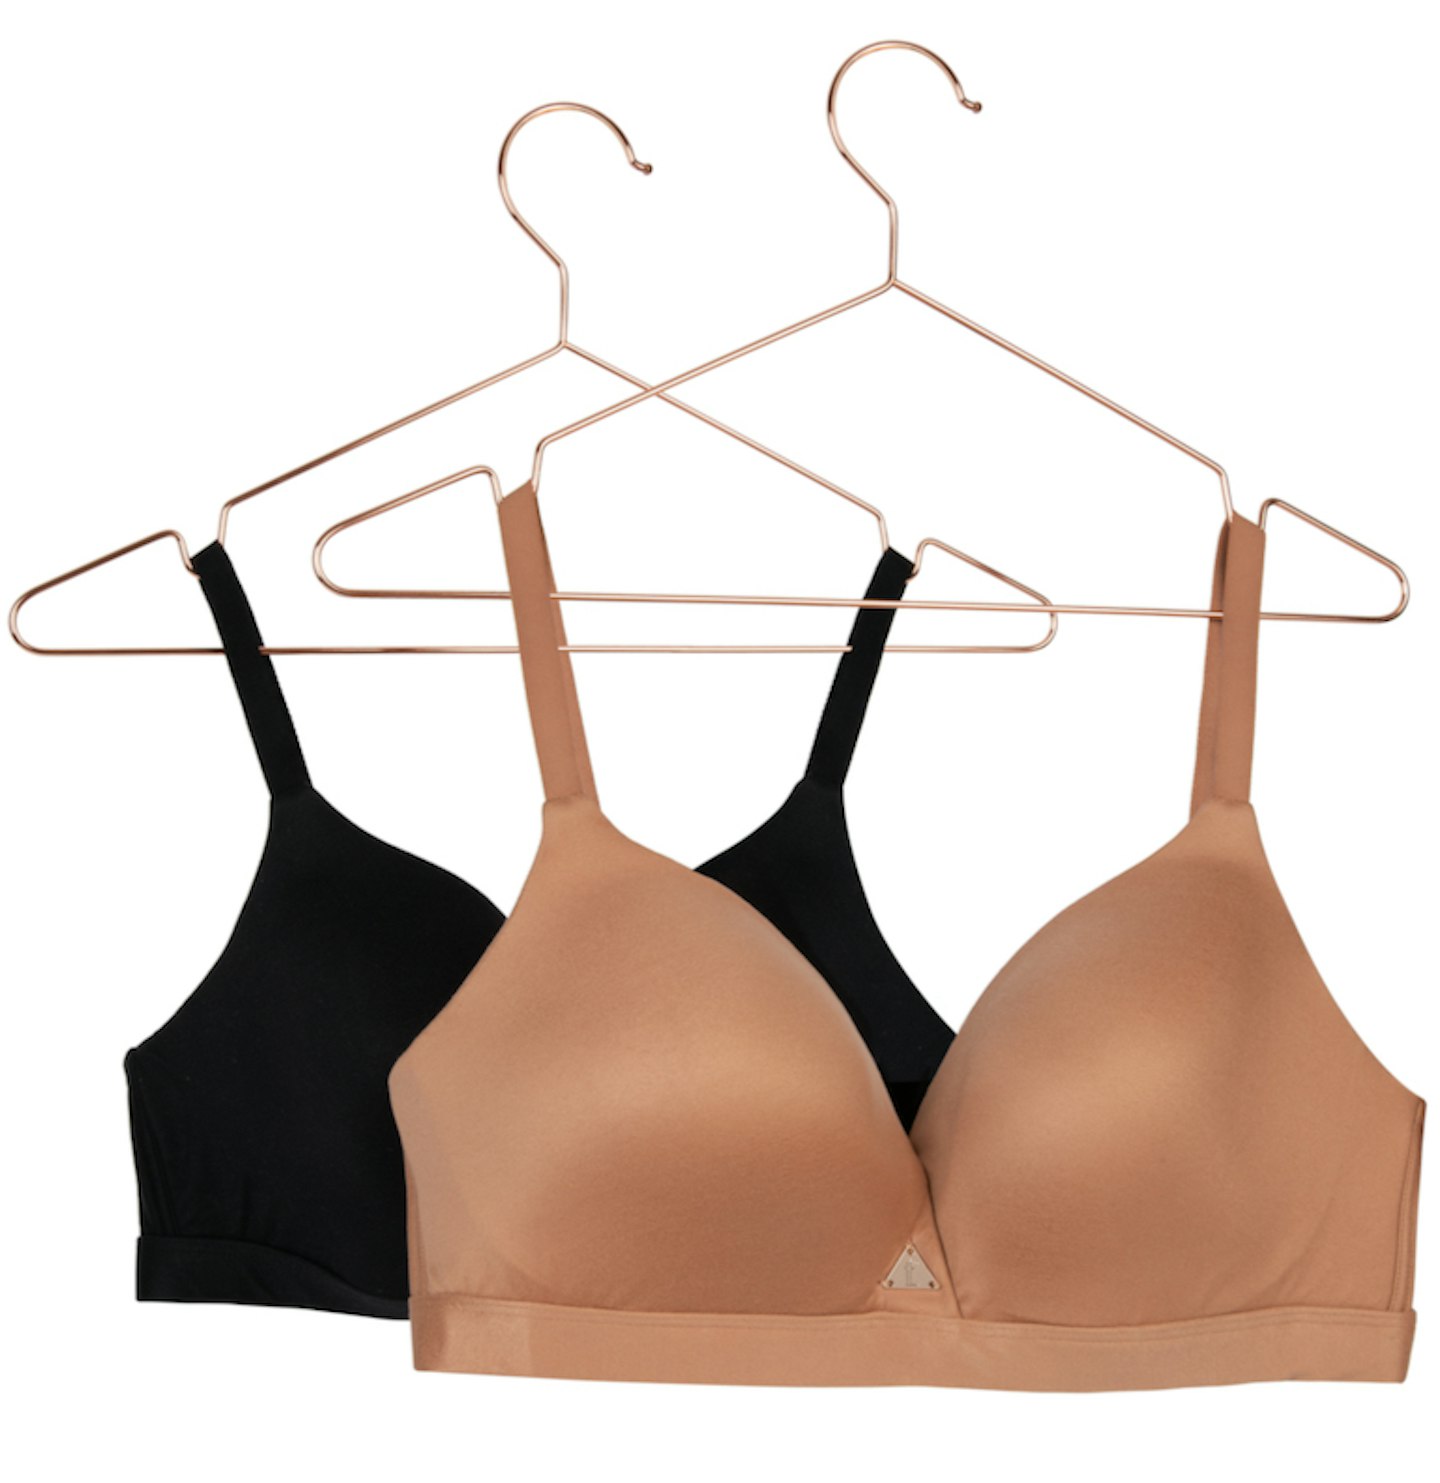 The Best Bras For Big Boobs In 2023: Where To Shop